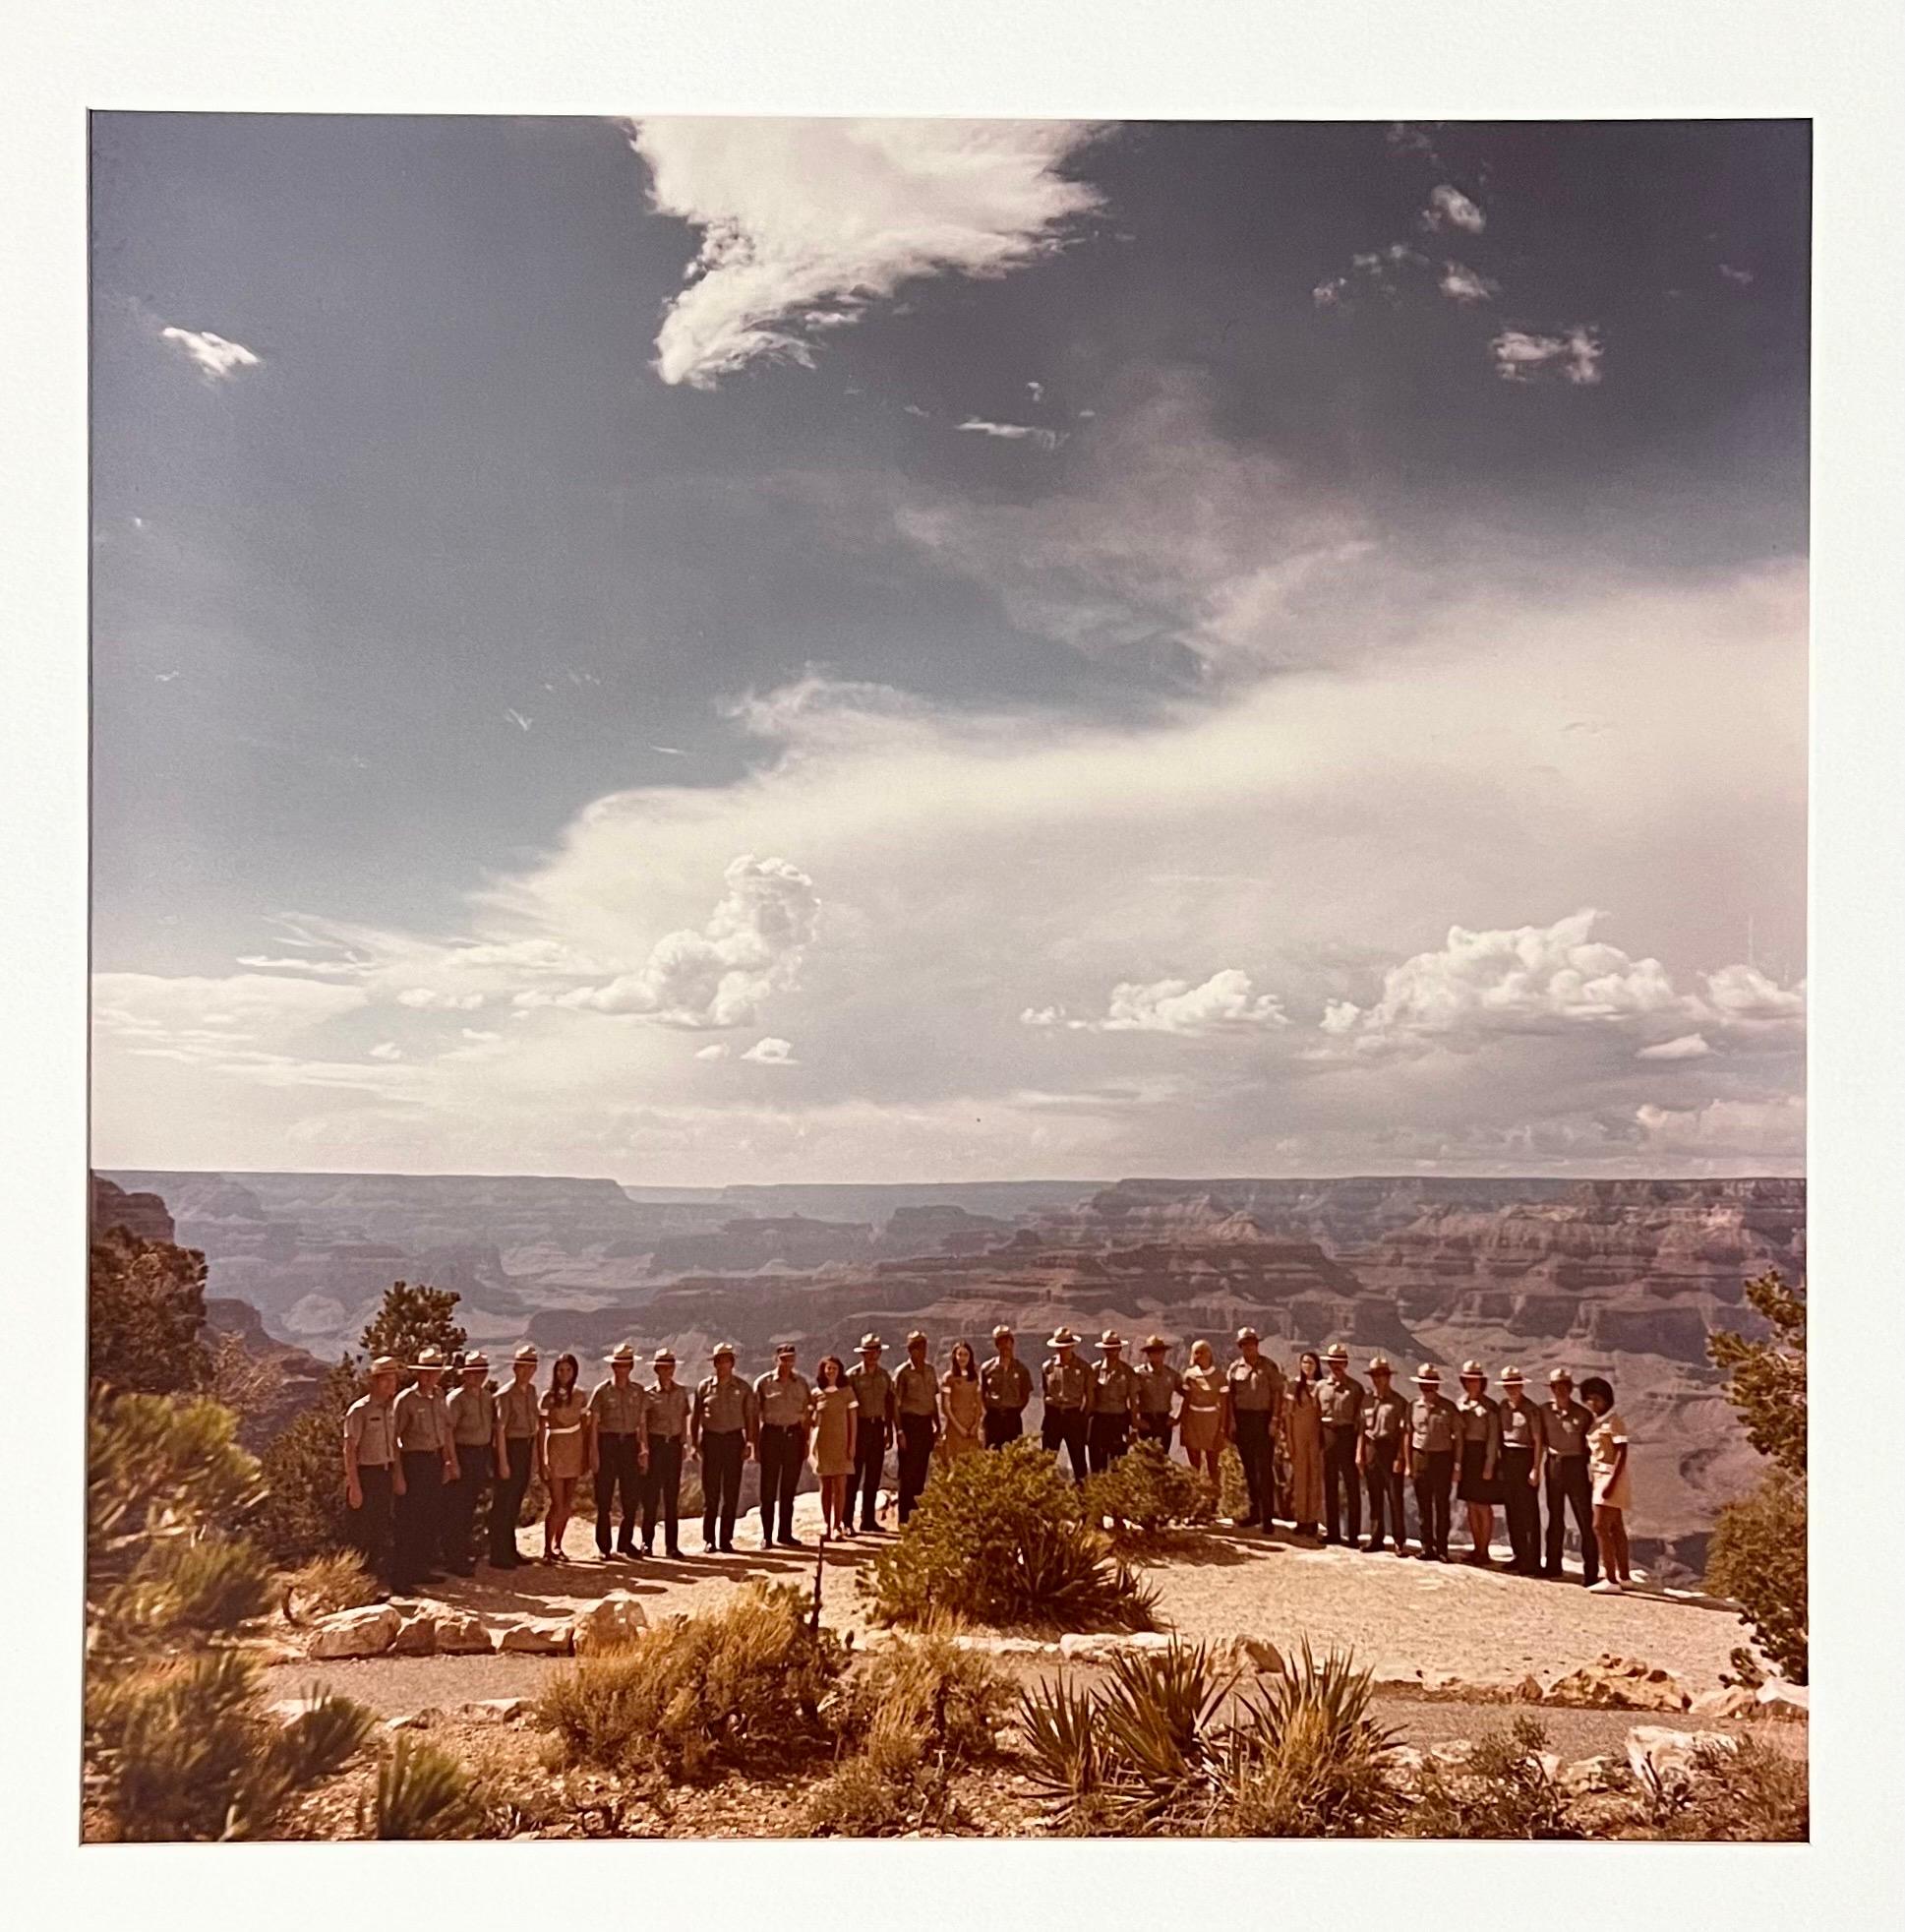 Neal Slavin (American, b. 1941)
Grand Canyon National Park Service, Arizona
Vintage C-print [Chromogenic development print; Ektacolor prints]
Hand signed and numbered by the photographer 48/75
Photos made with 2.25 X 2.25 Hasselblad camera and 4 X 5